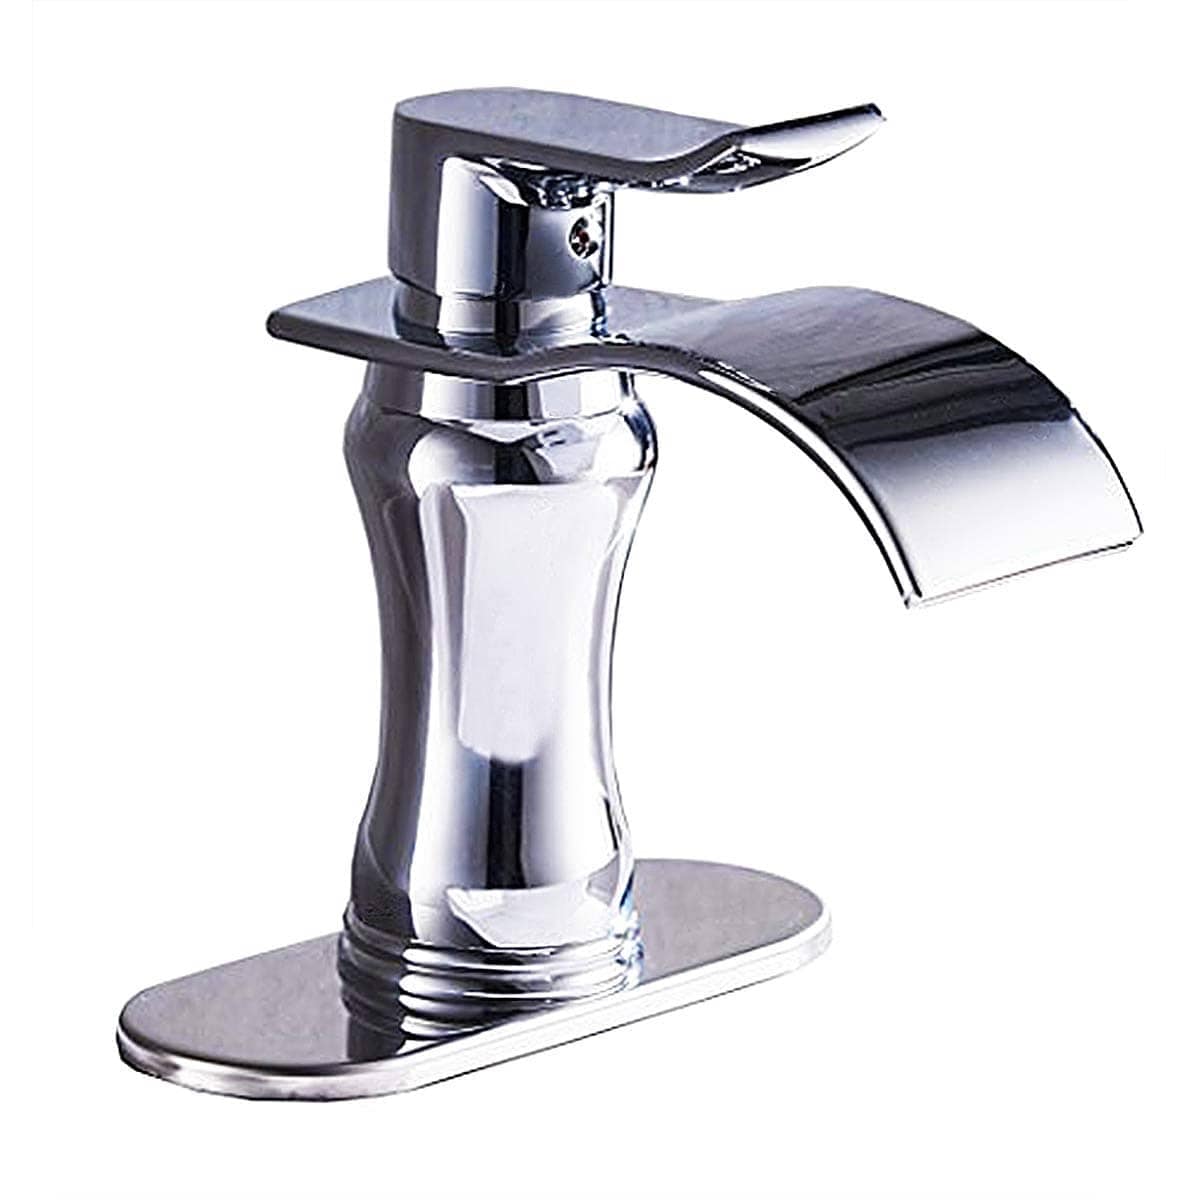 Bathroom Faucet Chrome Waterfall Water Flow Vessel One Hole/Handle Mixer Tap 